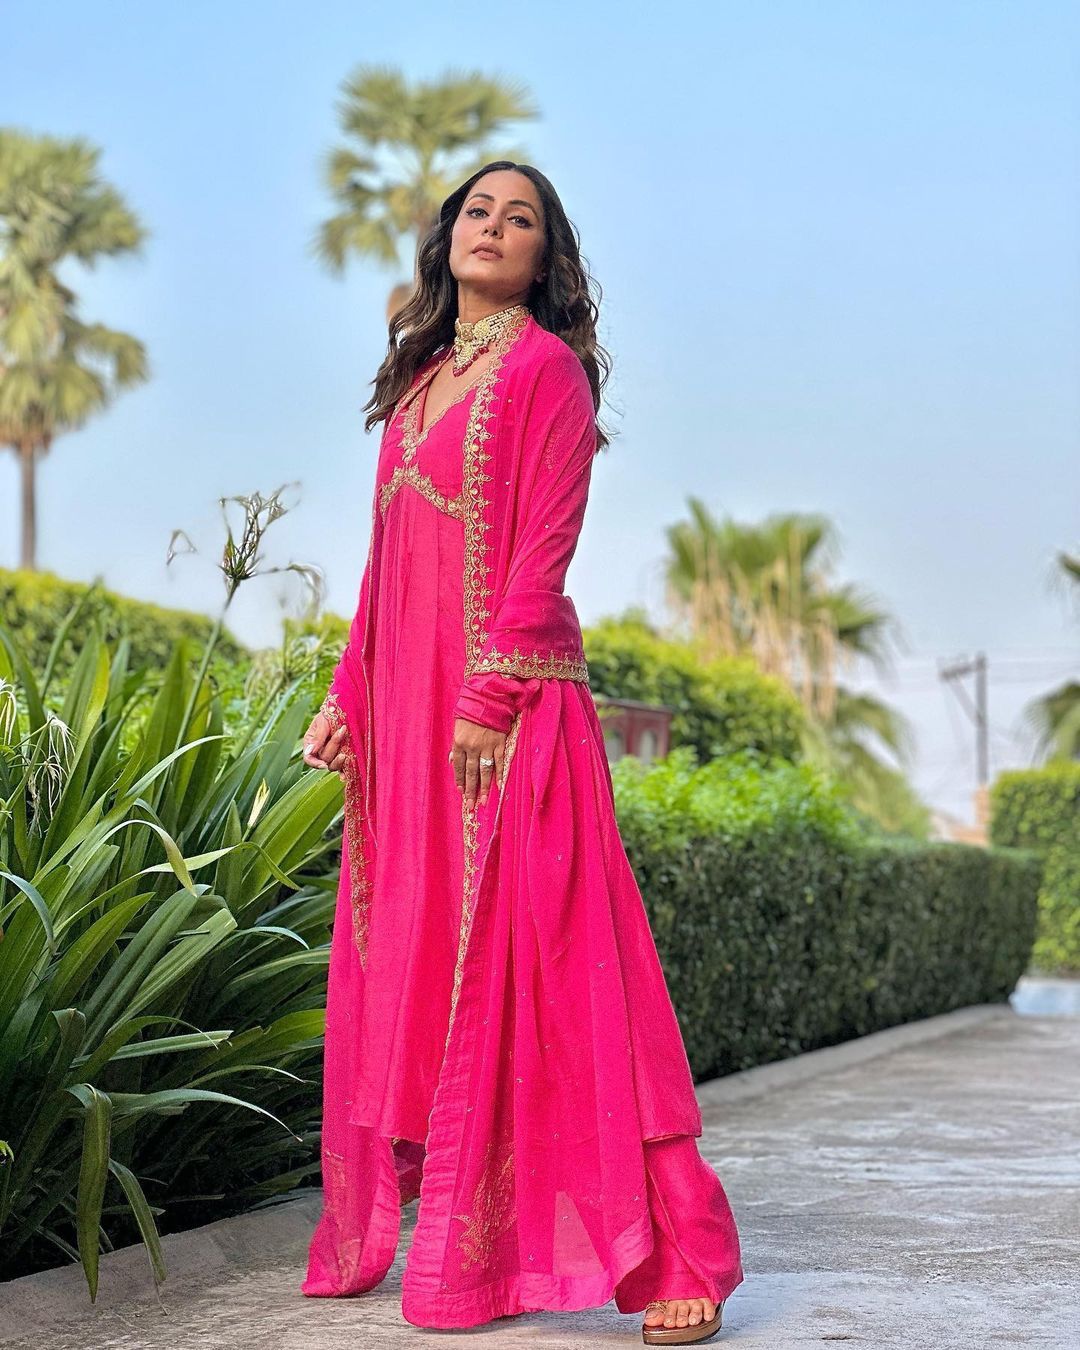 Hina Khan Wear Function Wear Pink Color Gown